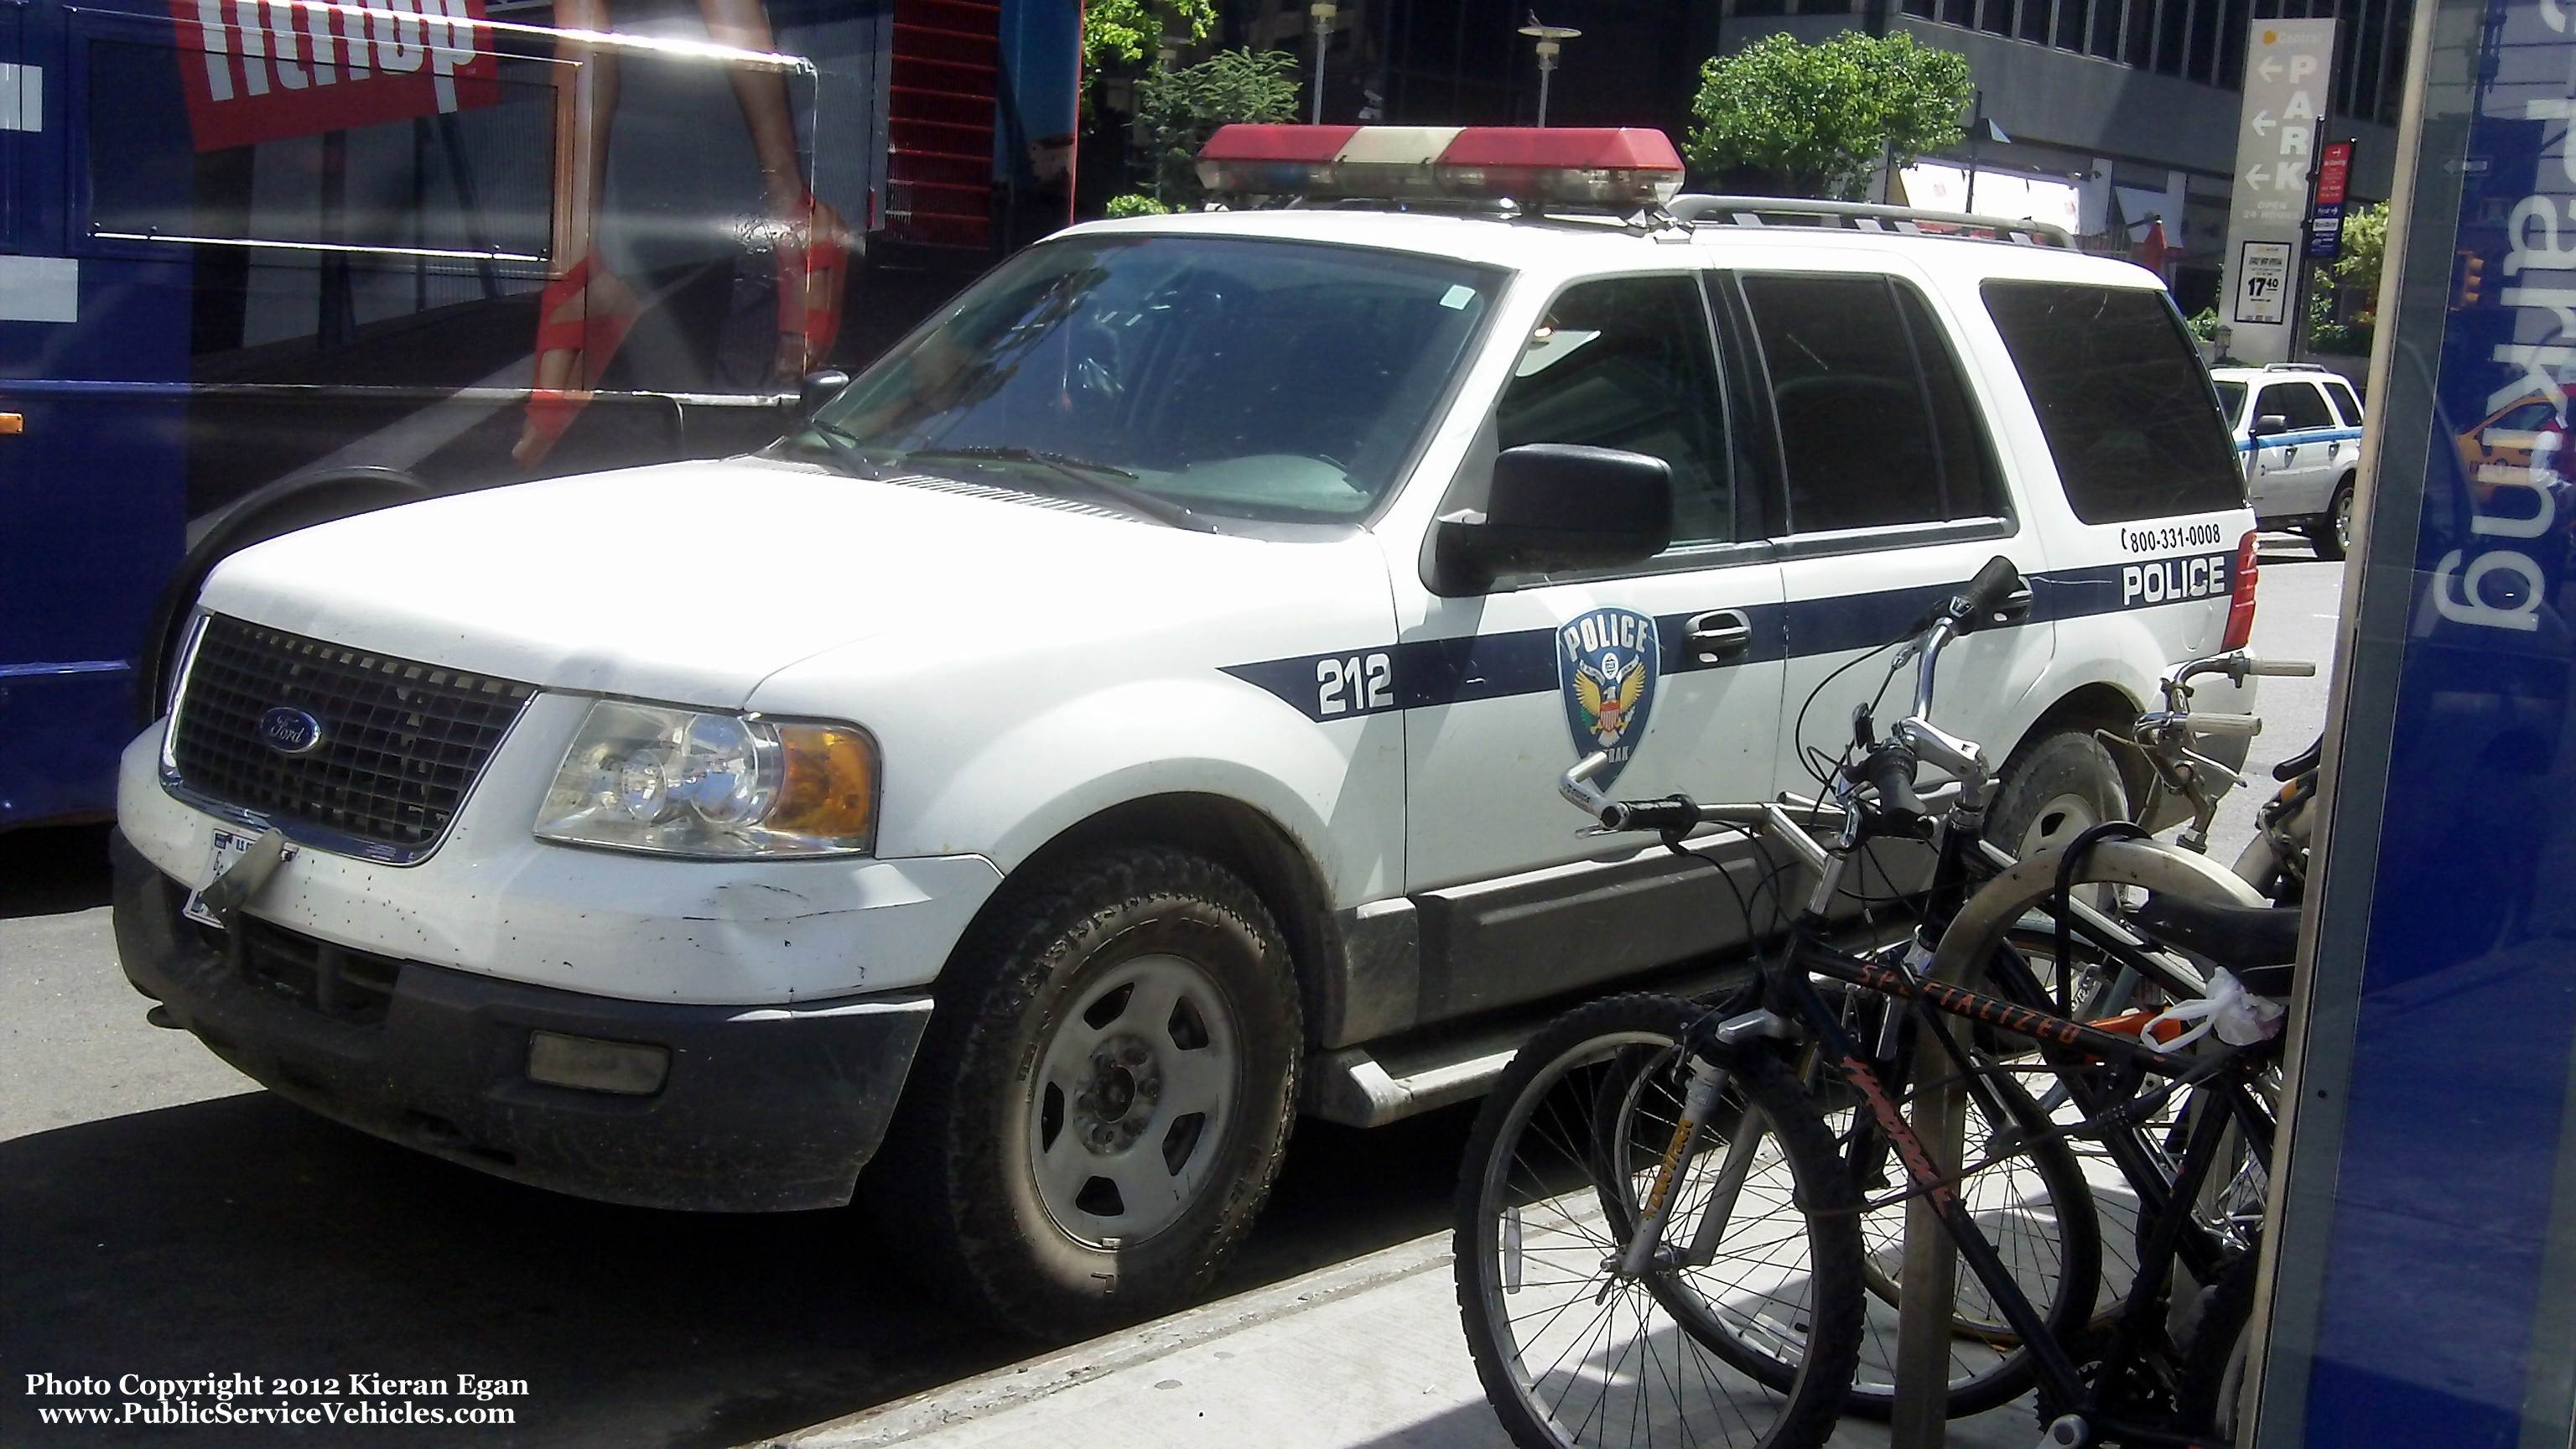 A photo  of Amtrak Police
            Cruiser 212, a 2003-2006 Ford Expedition             taken by Kieran Egan